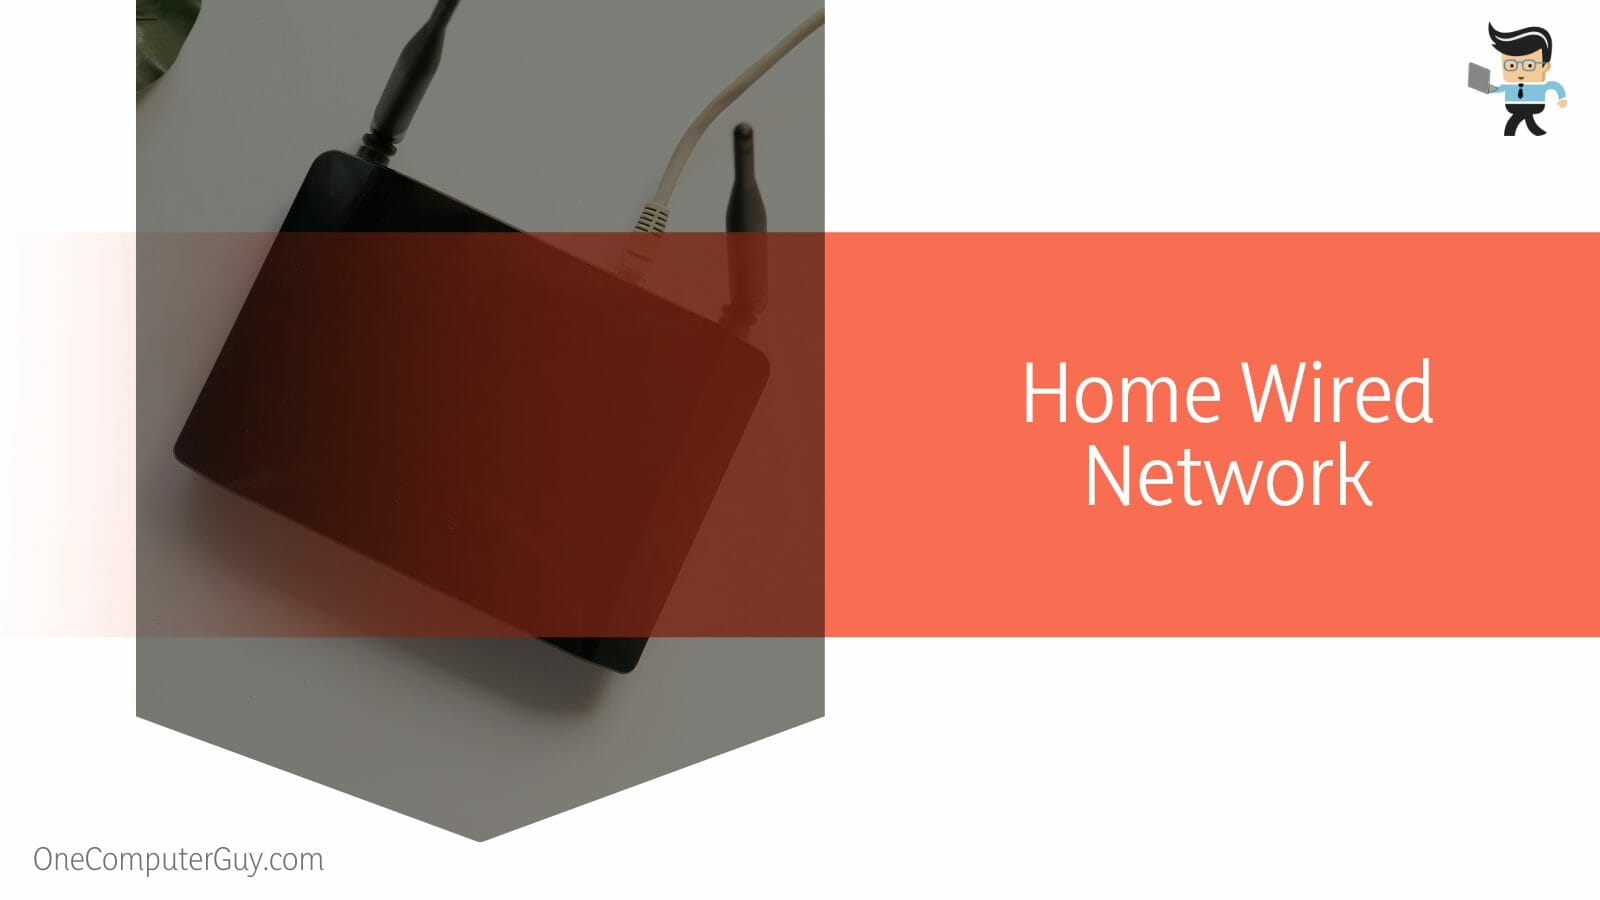 Home Wired Network